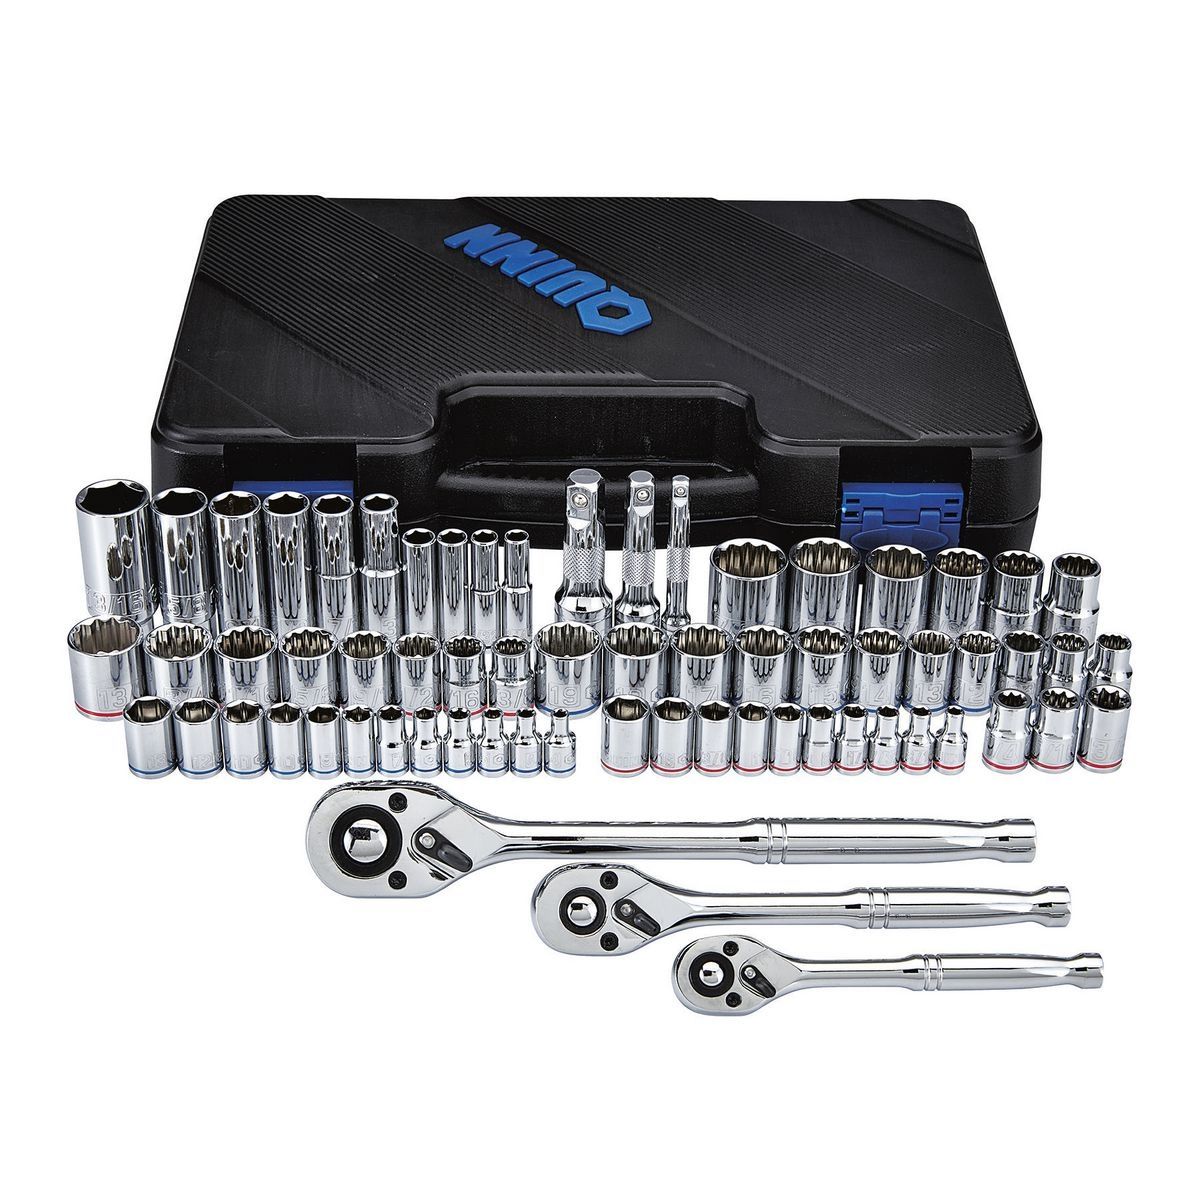 1/4 in., 3/8 in., 1/2 in. Drive SAE & Metric Hi-Vis Socket Set, 66 Pc. on Sale At Harbor Freight Tools